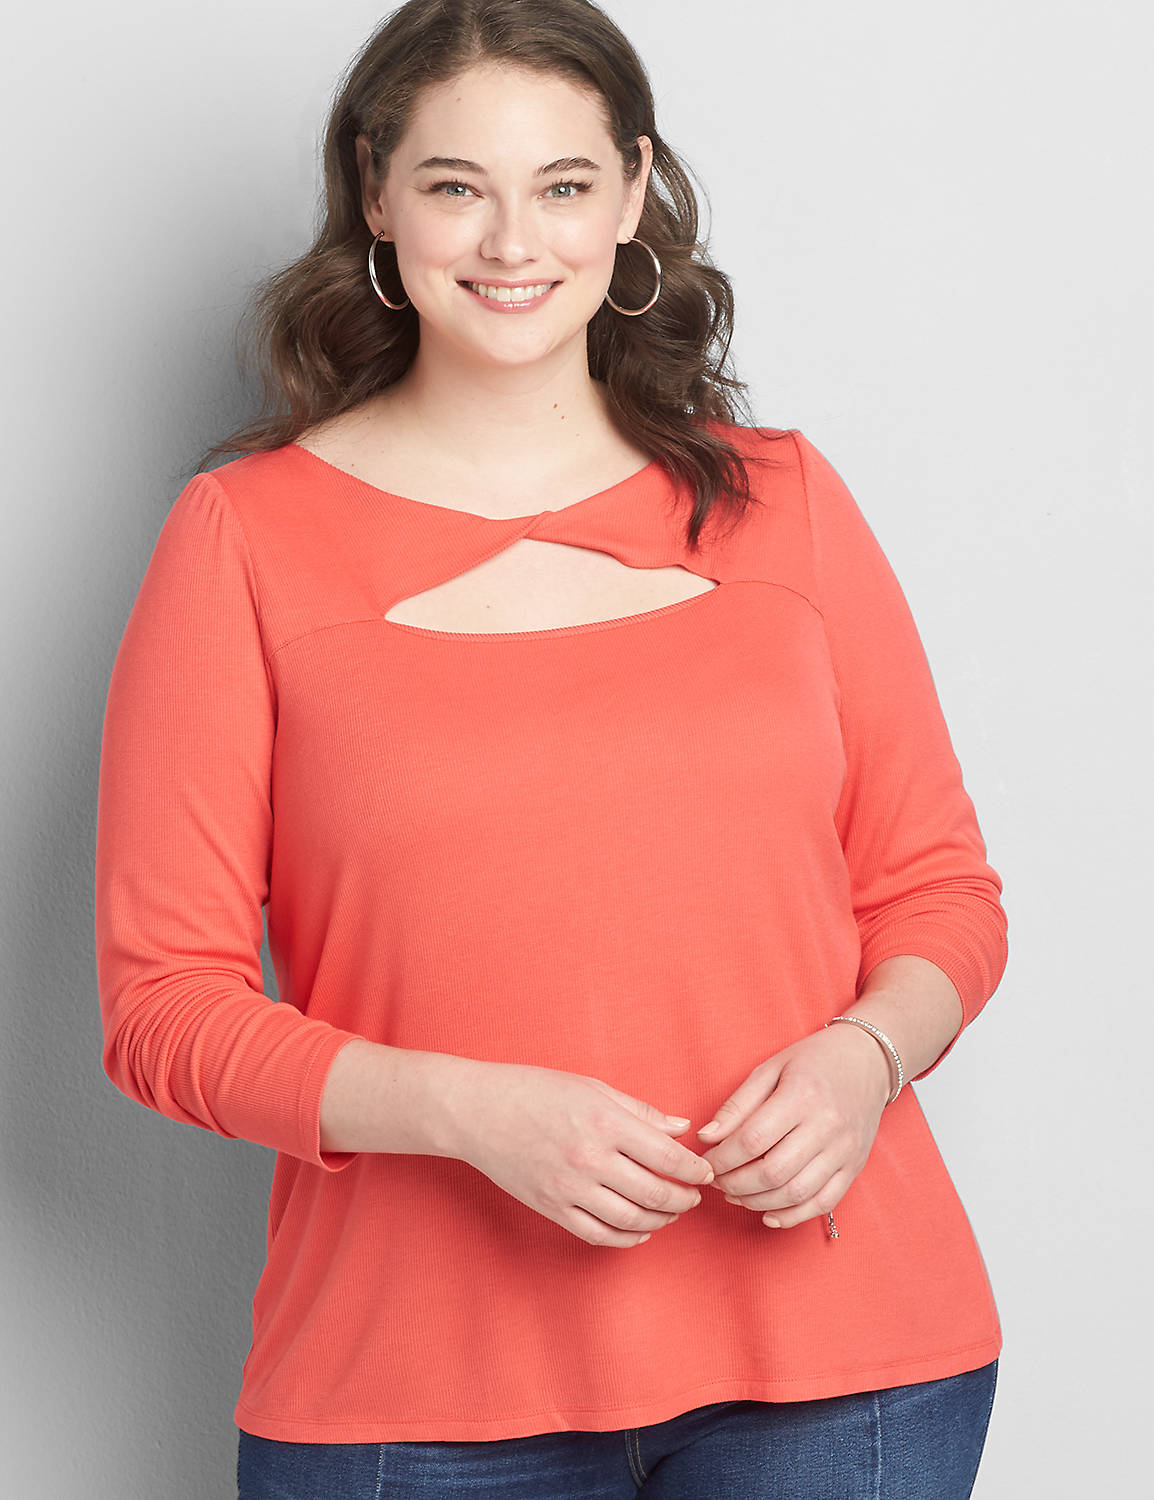 Long Sleeve Twist Neck Fitted Rib Top 1118539:Starfish Coral CSI 0301184:10/12 Product Image 1